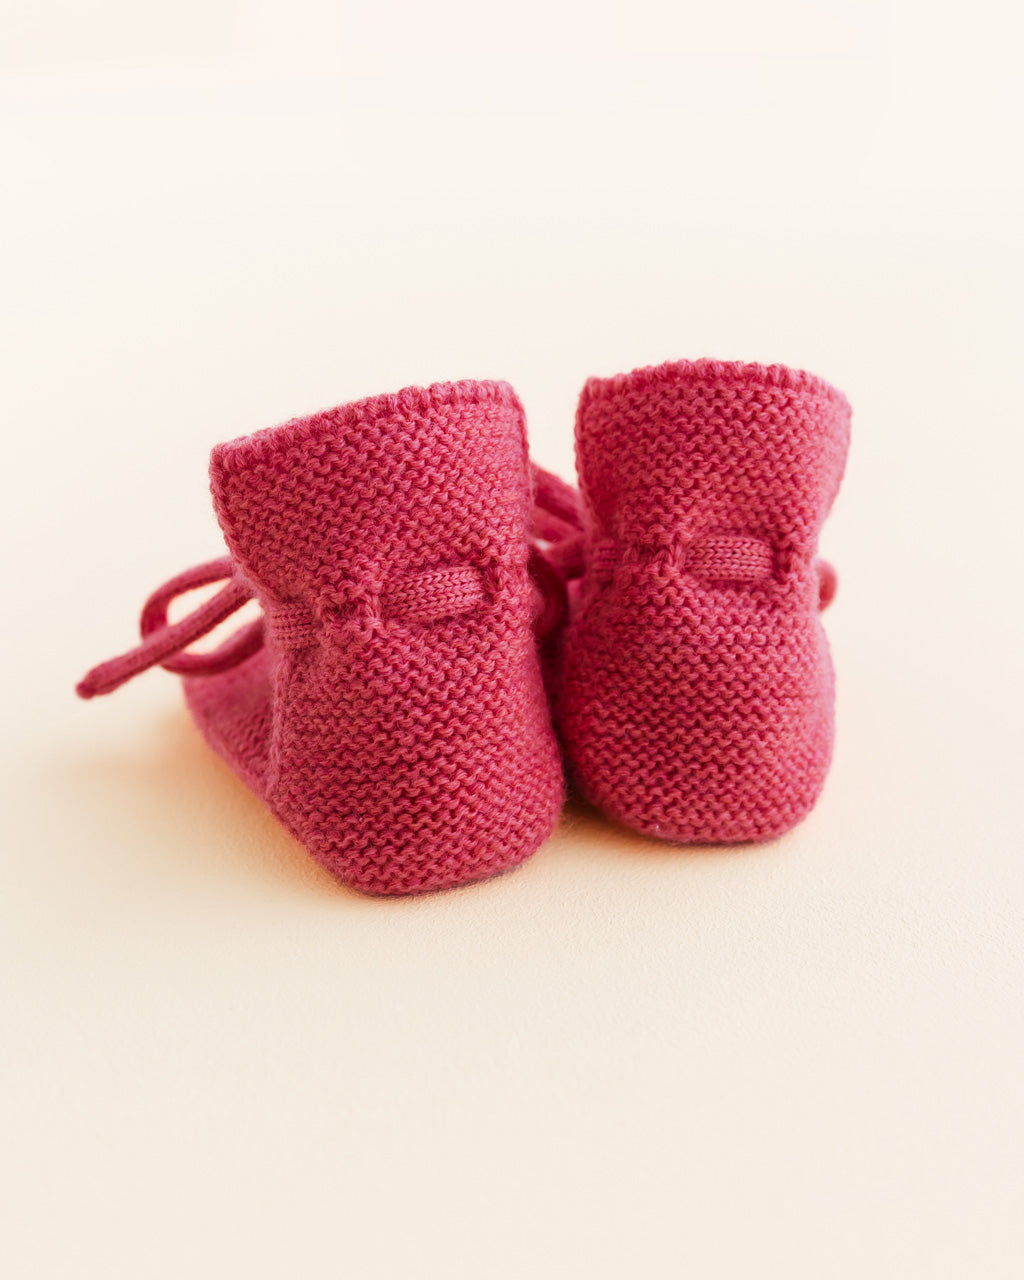 Booties 'Lollipop' - The Little One • Family.Concept.Store. 